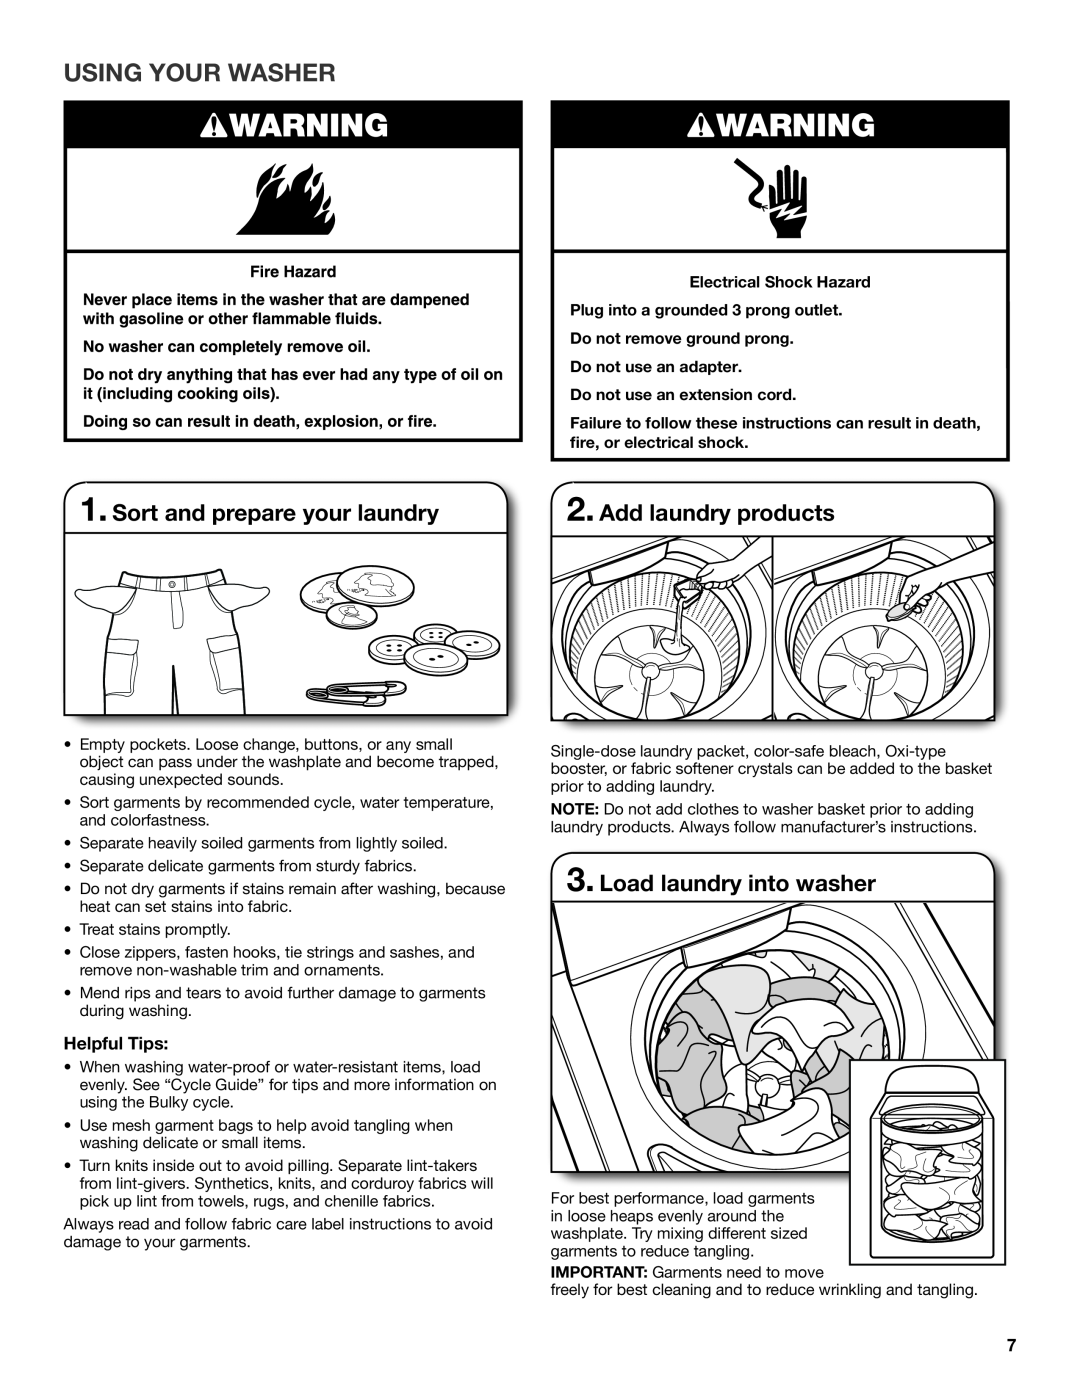 Maytag W10560155B warranty Using Your Washer, Sort and prepare your laundry, Add laundry products, Load laundry into washer 